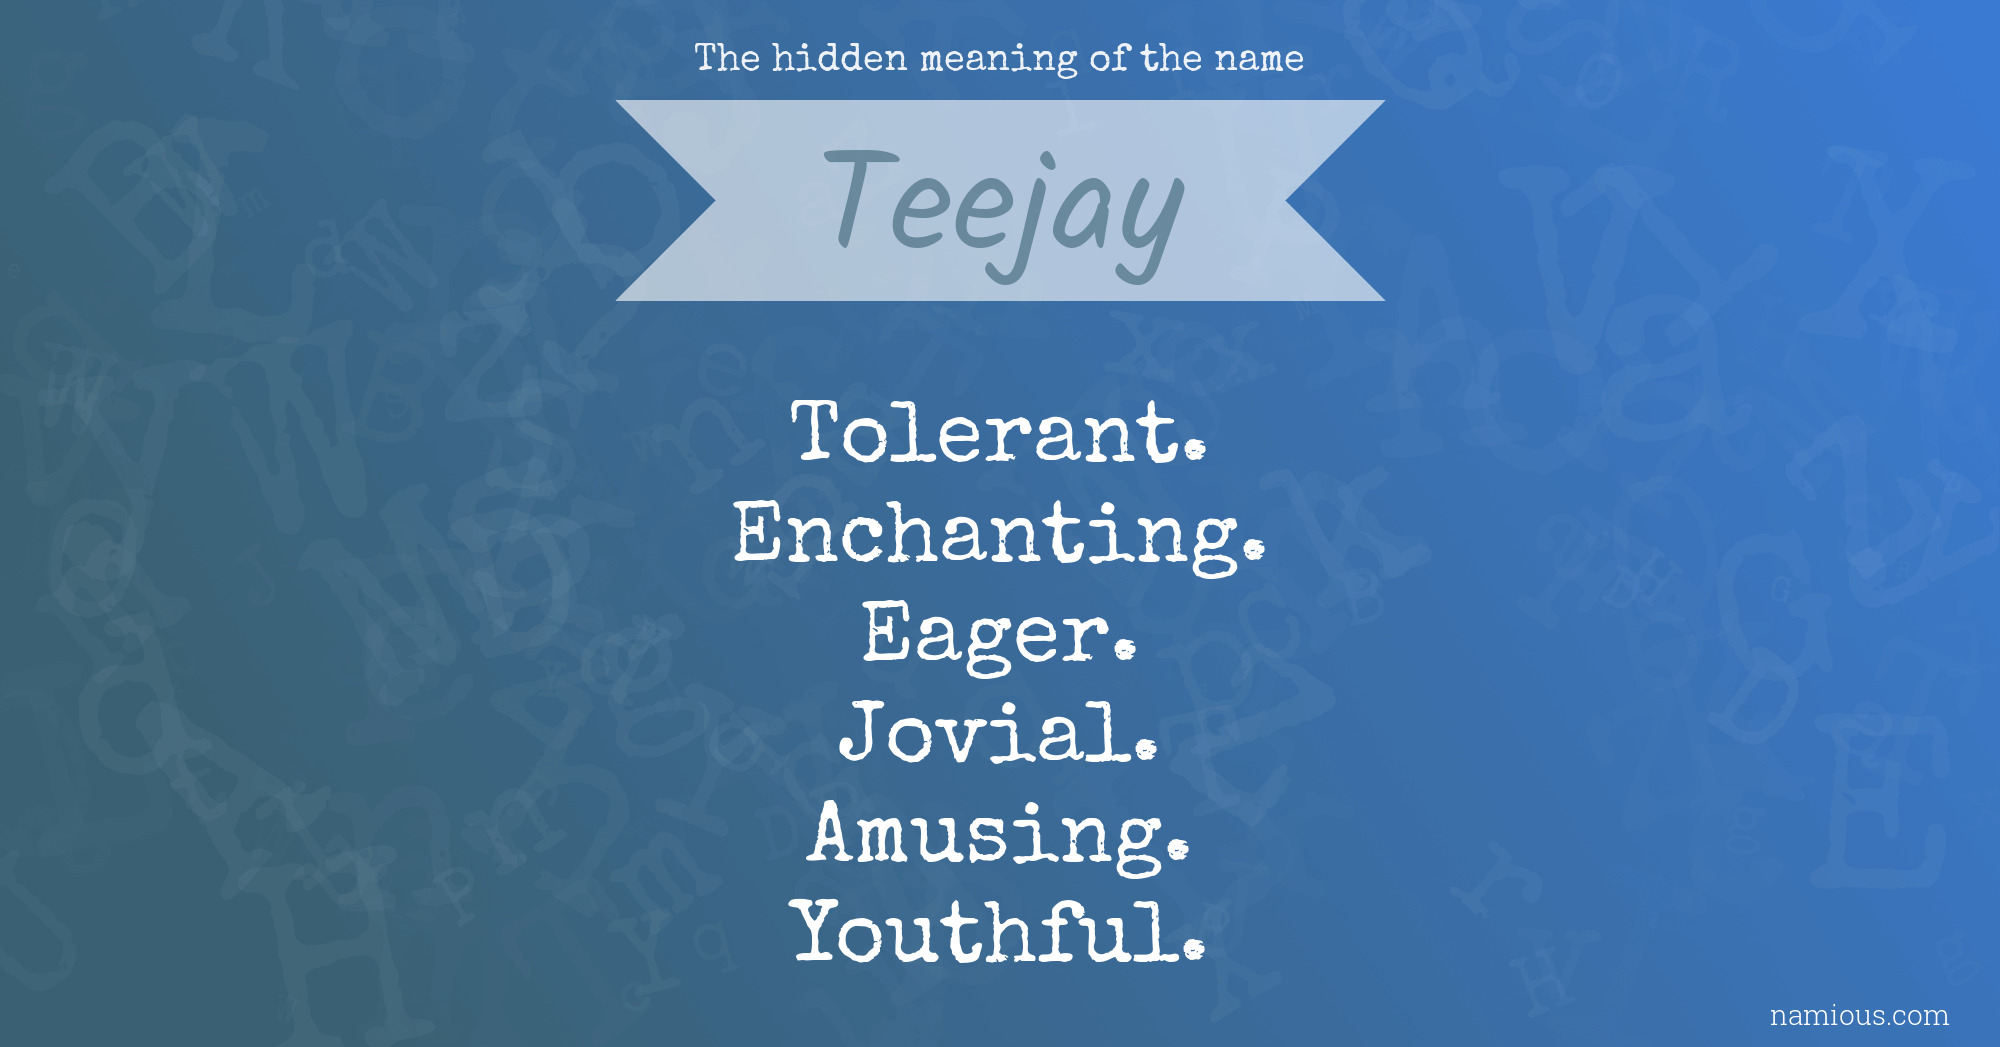 The hidden meaning of the name Teejay